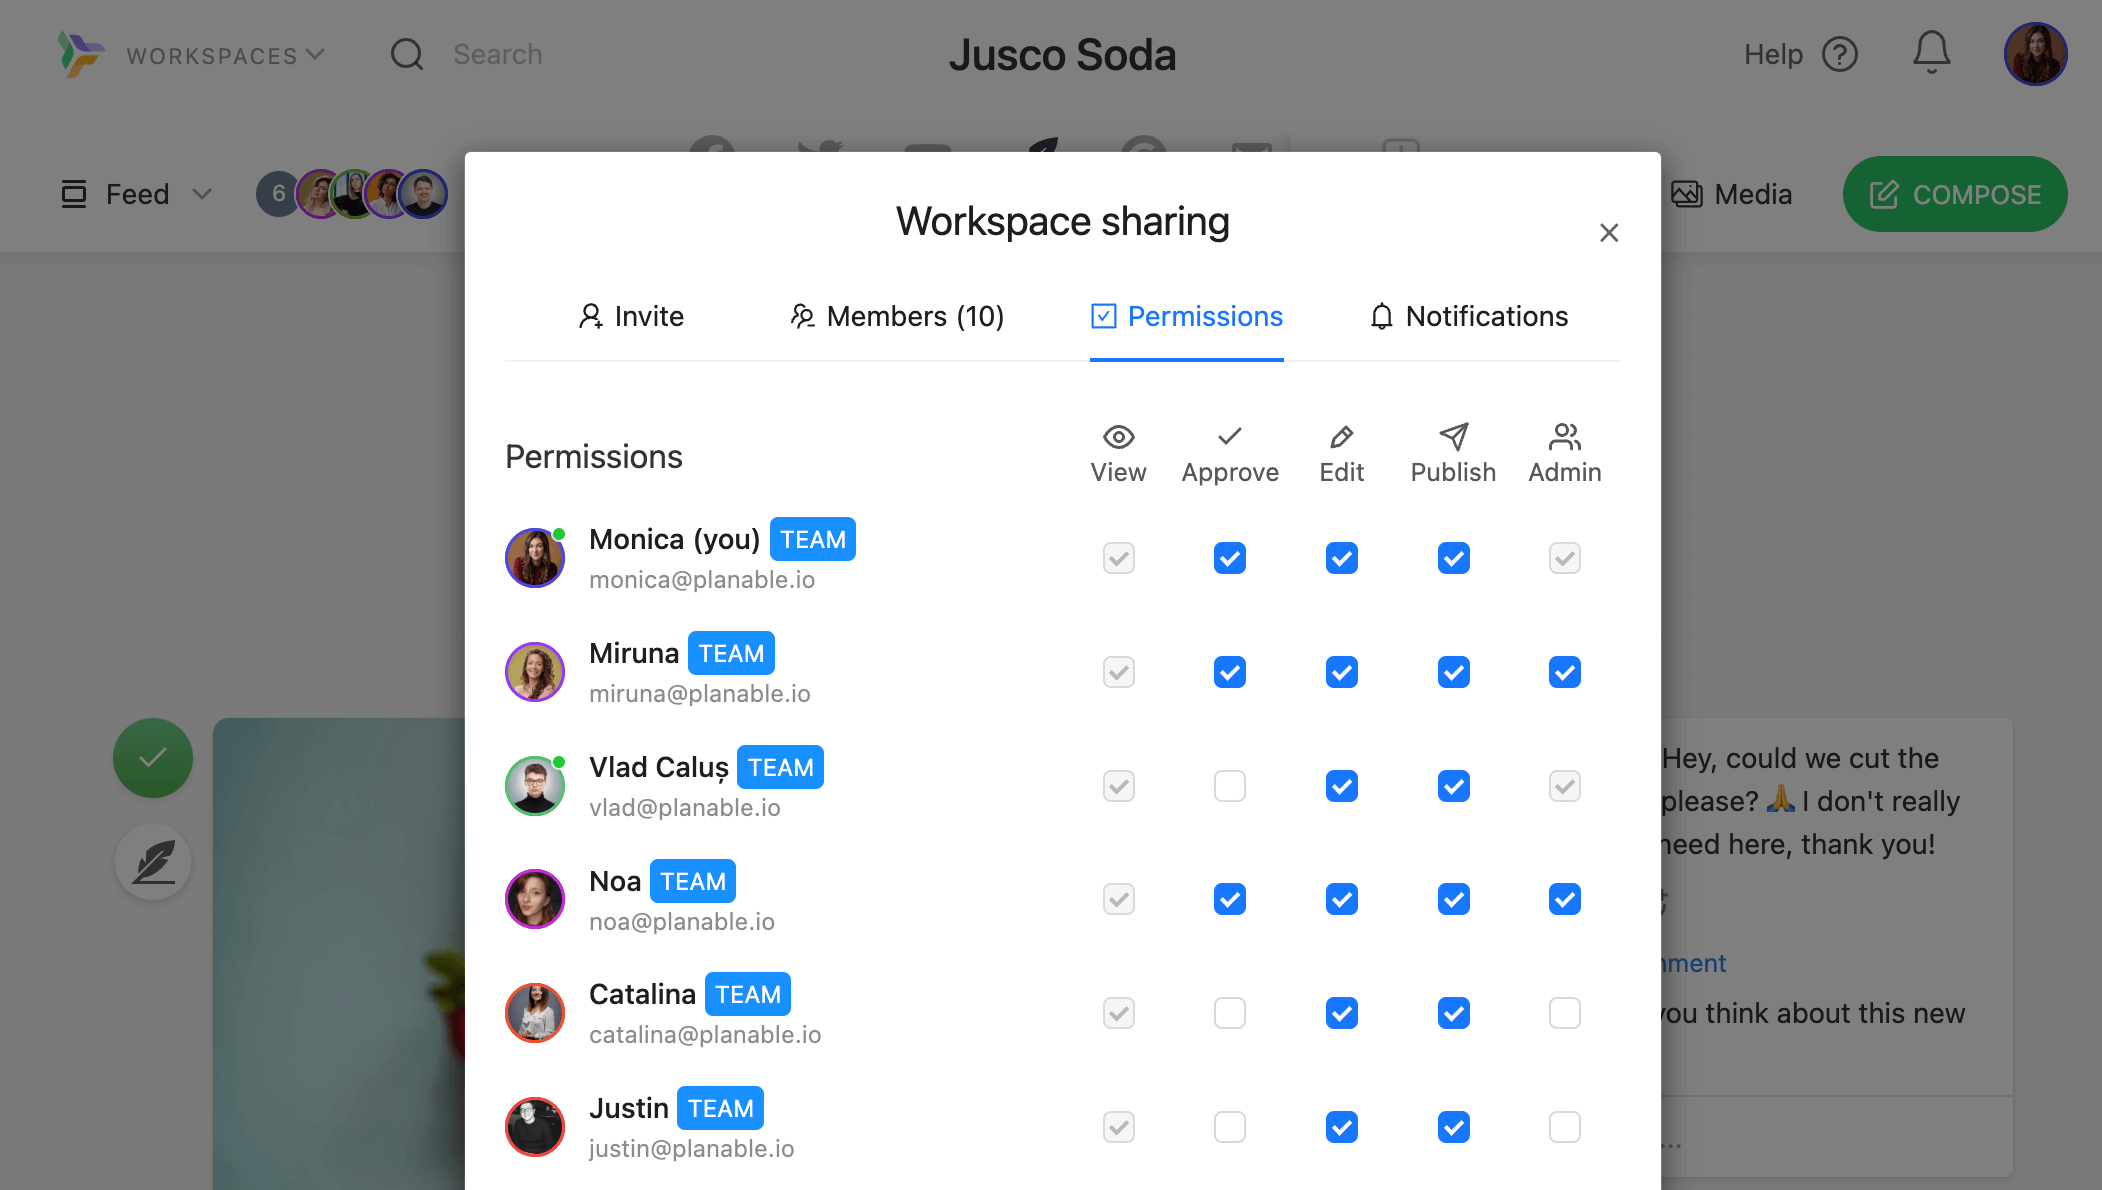 Workspace sharing settings for Jusco Soda, showing permissions for team members with options to view, approve, edit, publish, and admin.